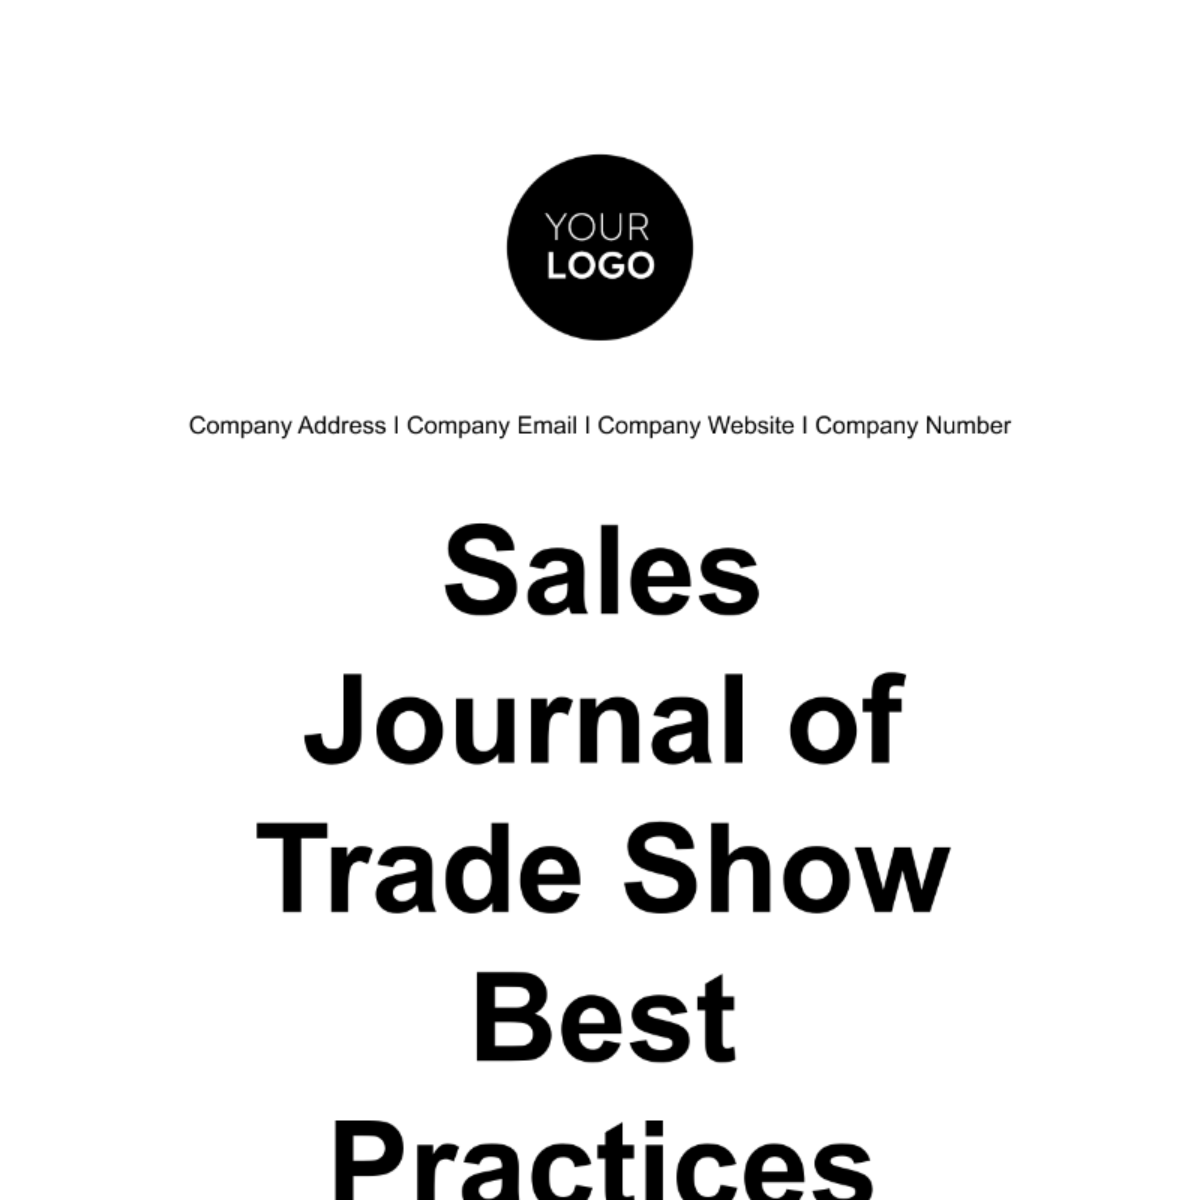 Sales Journal of Trade Show Best Practices Template